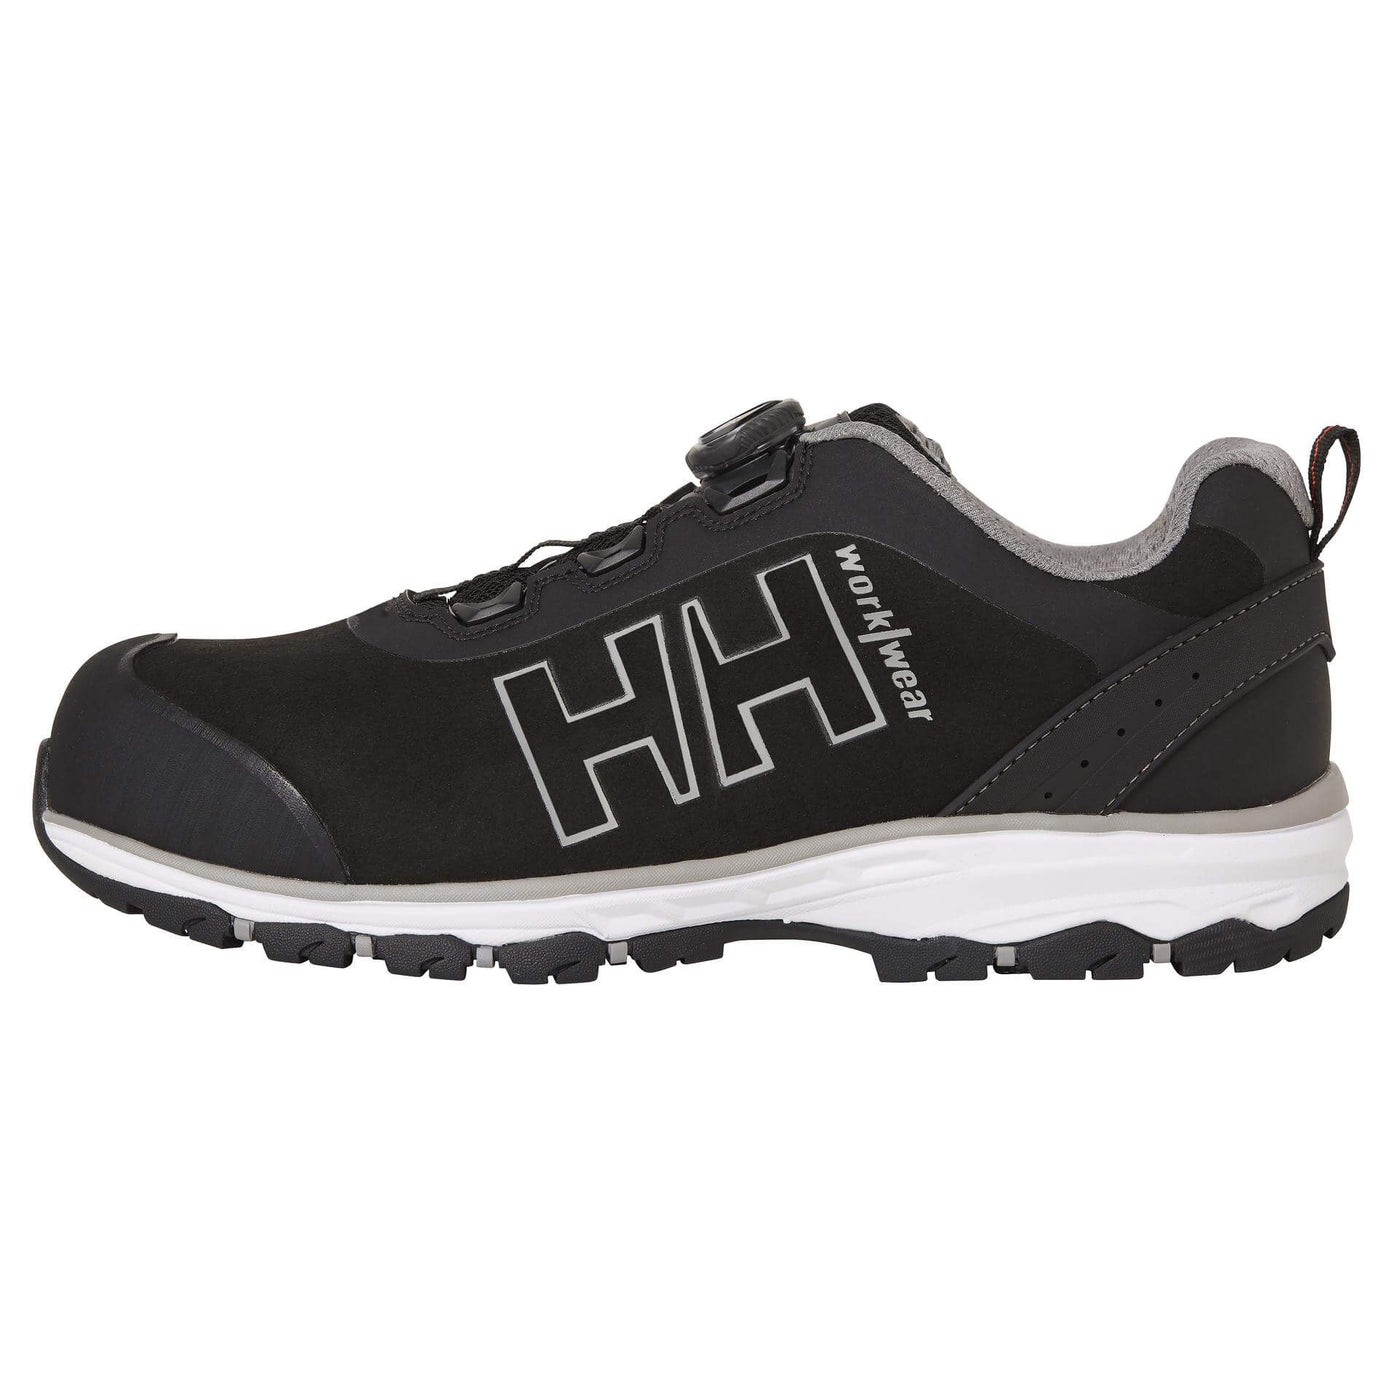 Helly Hansen Chelsea Evolution Boa Wide Waterproof Composite Toe Cap Work Safety Shoes Black/Grey 1 Front #colour_black-grey